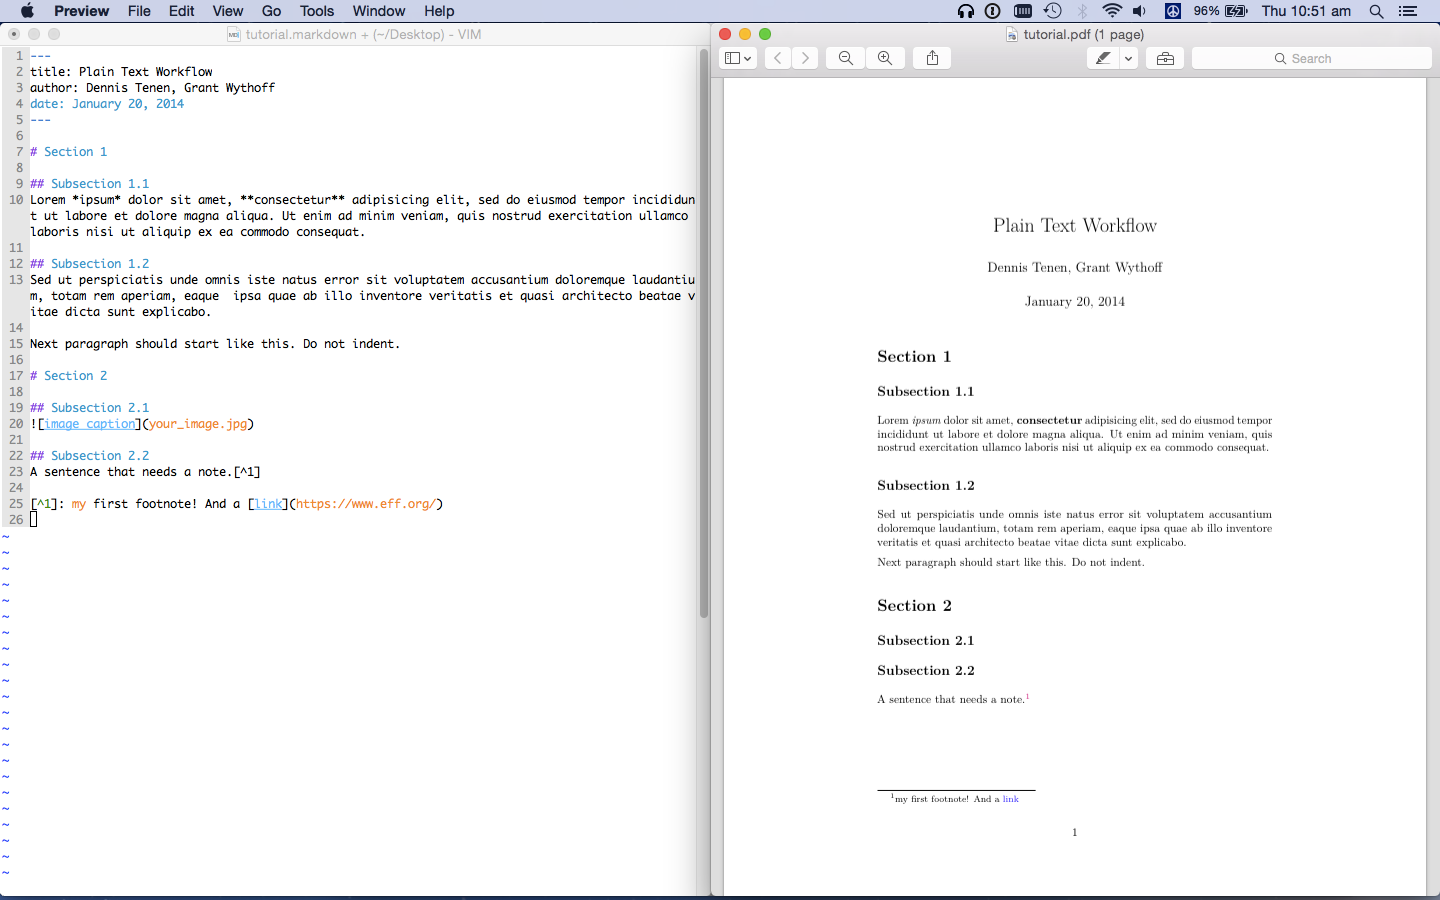 Screen shot of PDF rendered by Pandoc